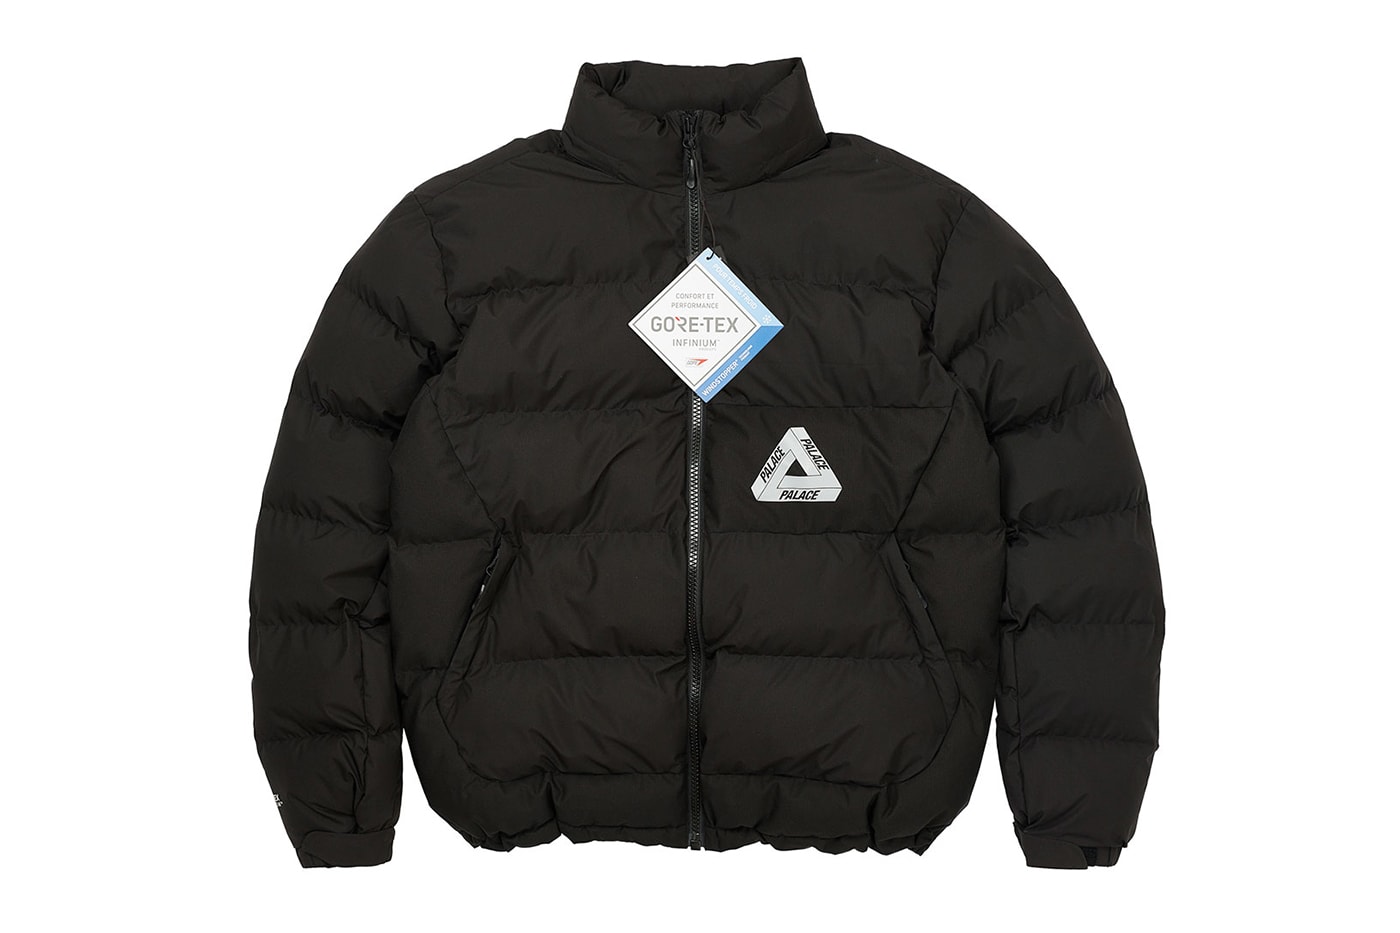 Palace Winter 2020 GORE TEX apparel collection drop info Ski-Doo snowmobile outdoors winter jacket outerwear  